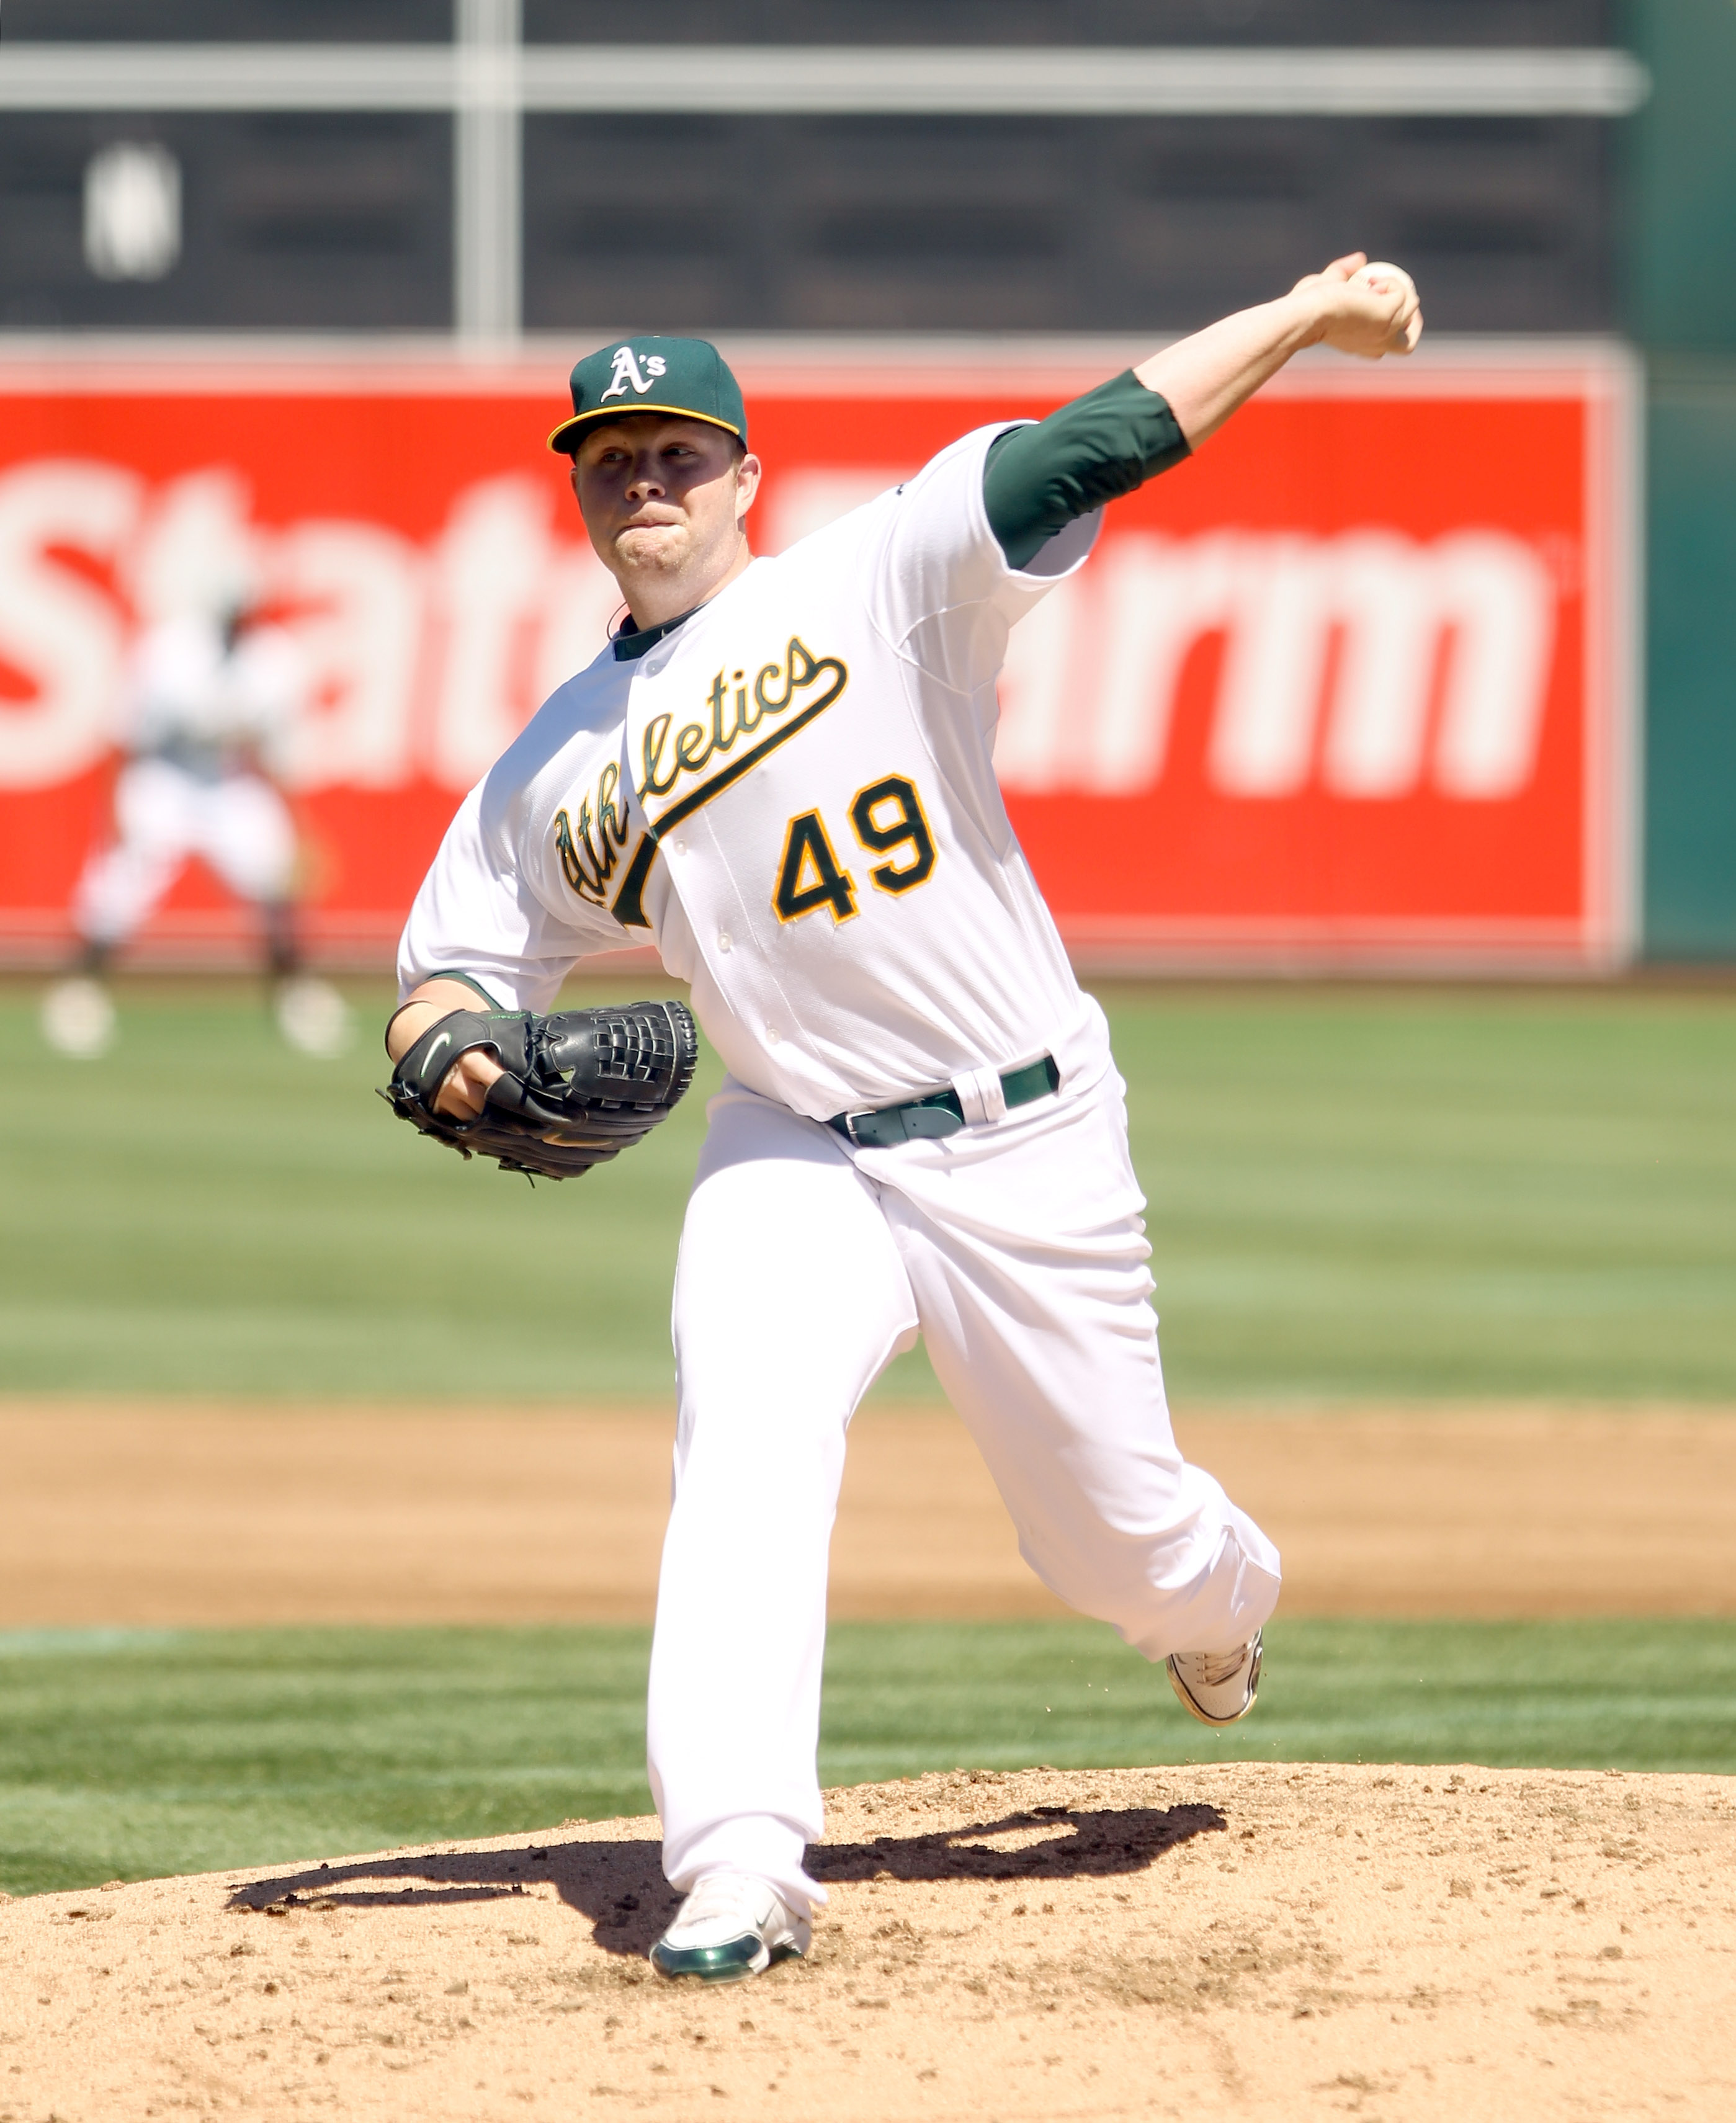 OAKLAND, CA - SEPTEMBER 06:  Brett Anderson #49 of the Oakland Athletics pitches against the Seattle Mariners at the Oakland-Alameda County Coliseum on September 6, 2010 in Oakland, California.  (Photo by Ezra Shaw/Getty Images)